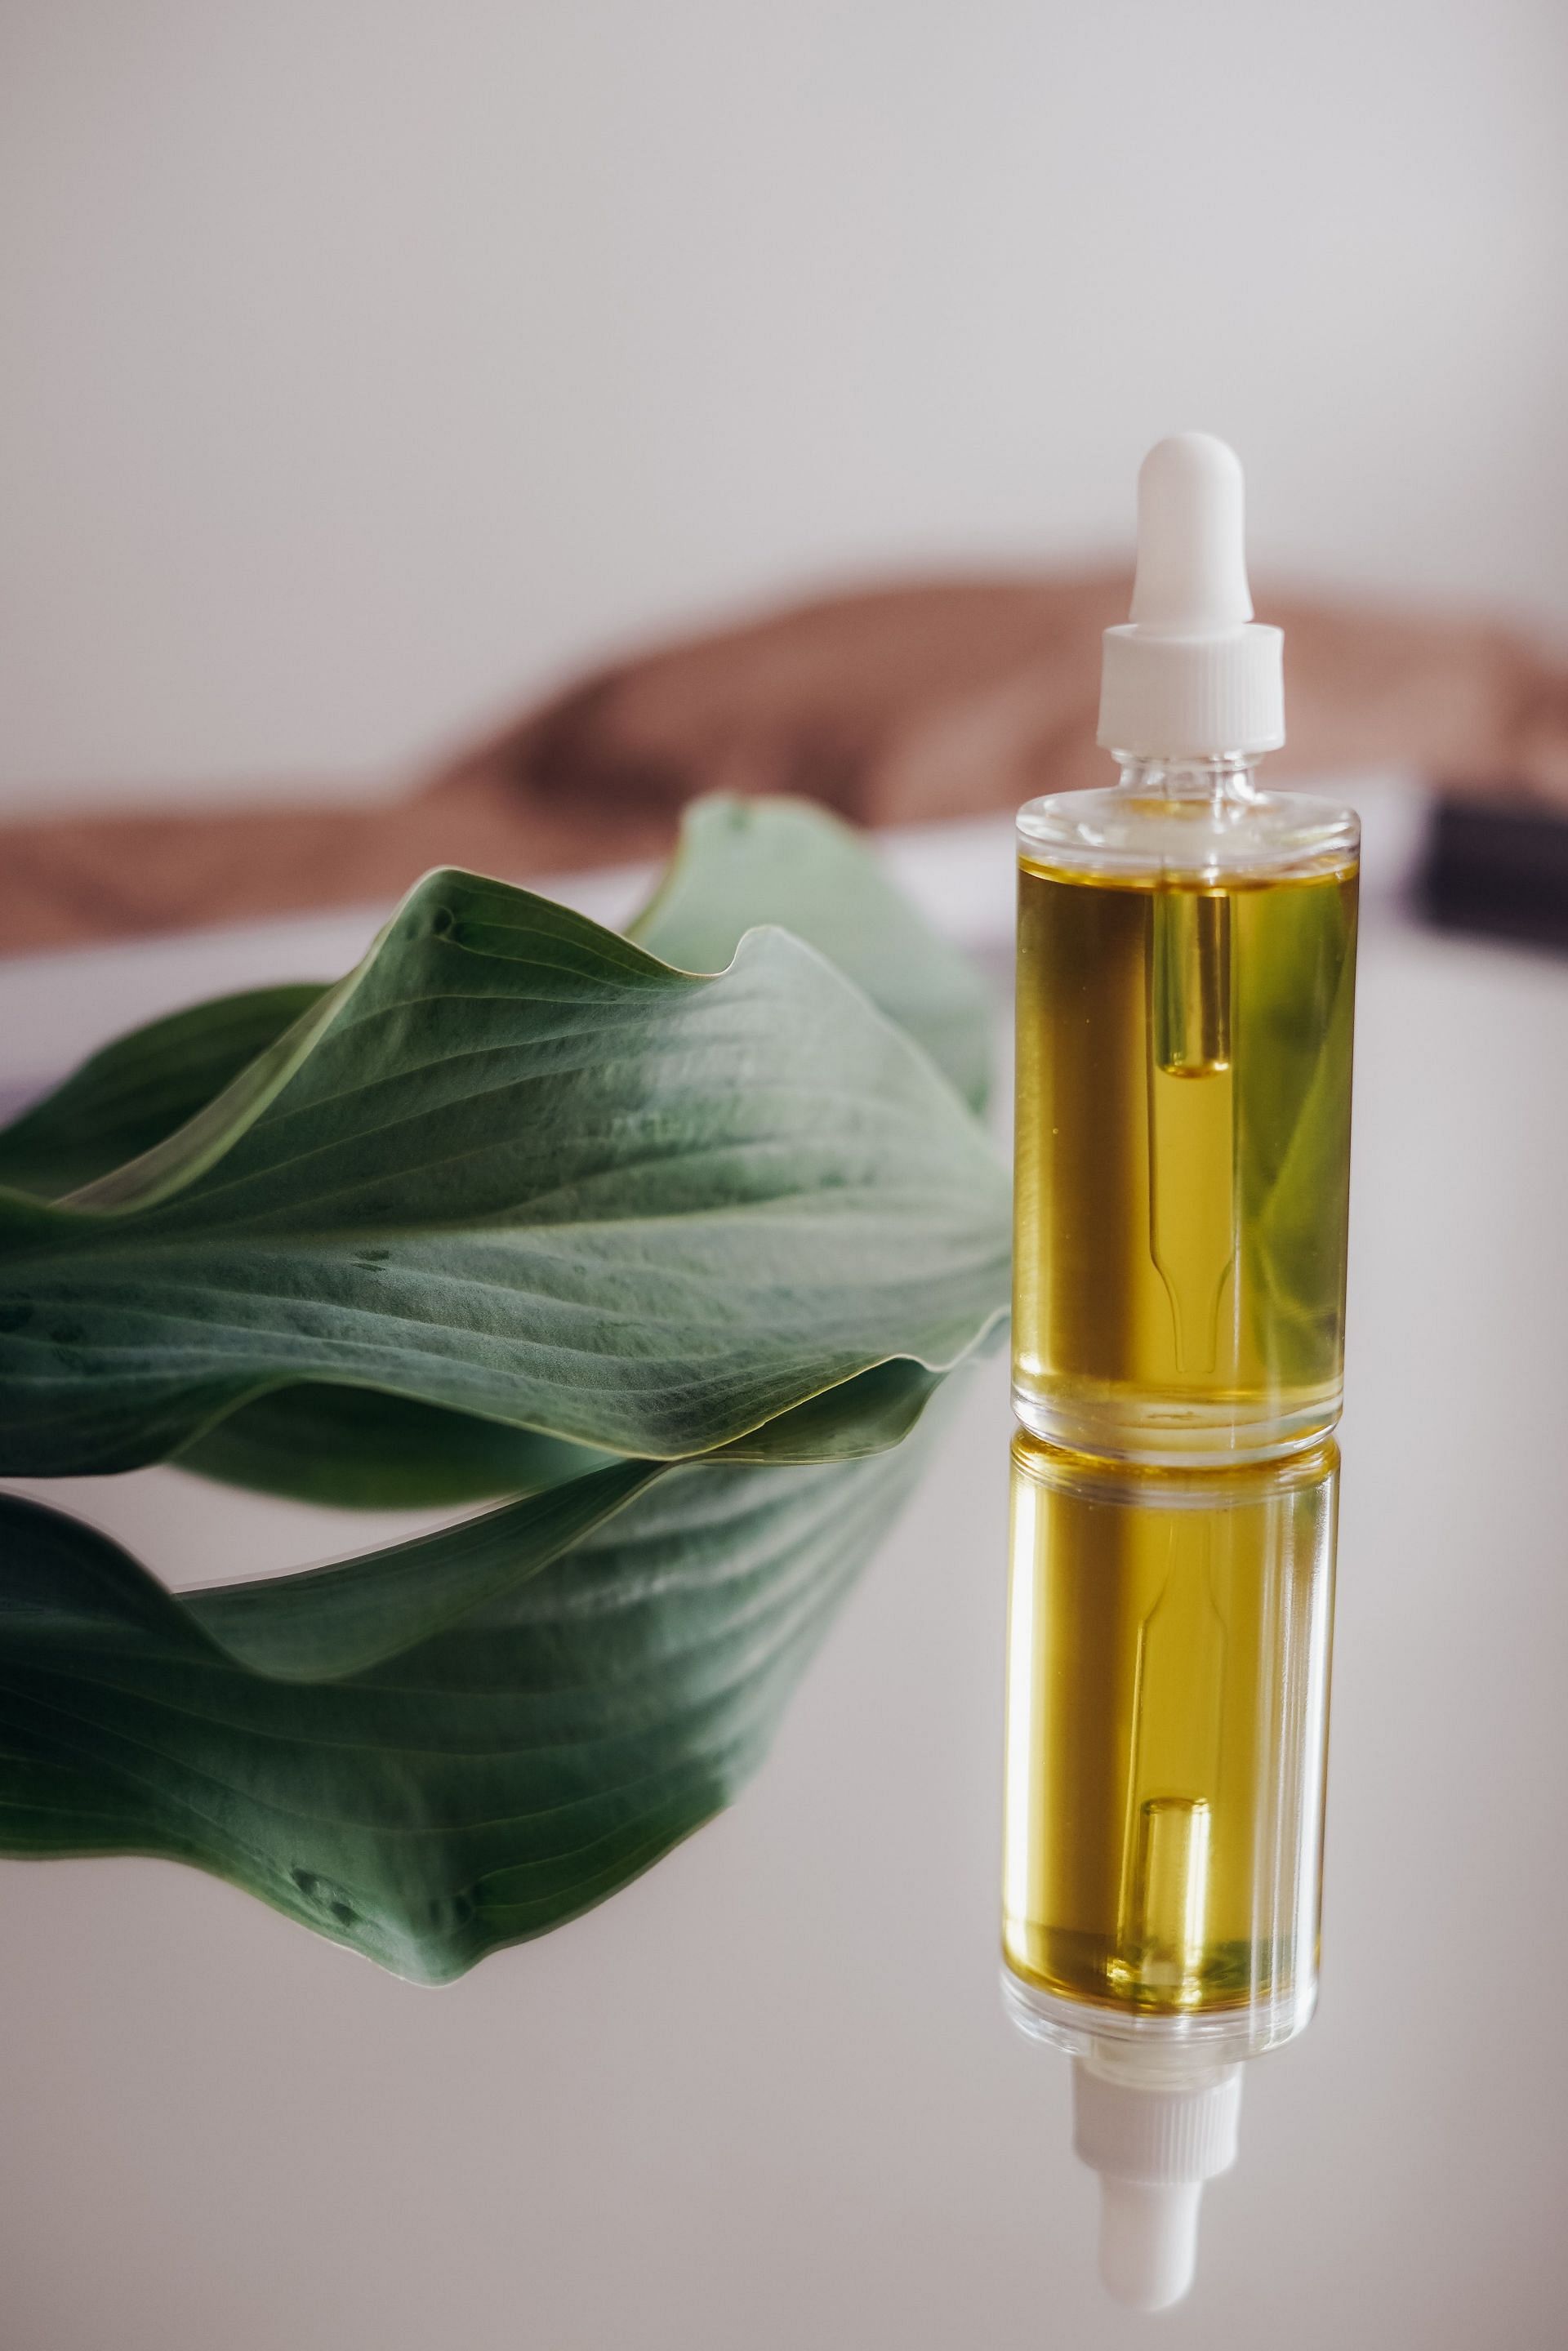 This oil promotes hair growth, treats dandruff, and conditions your hair. (image via Pexels)